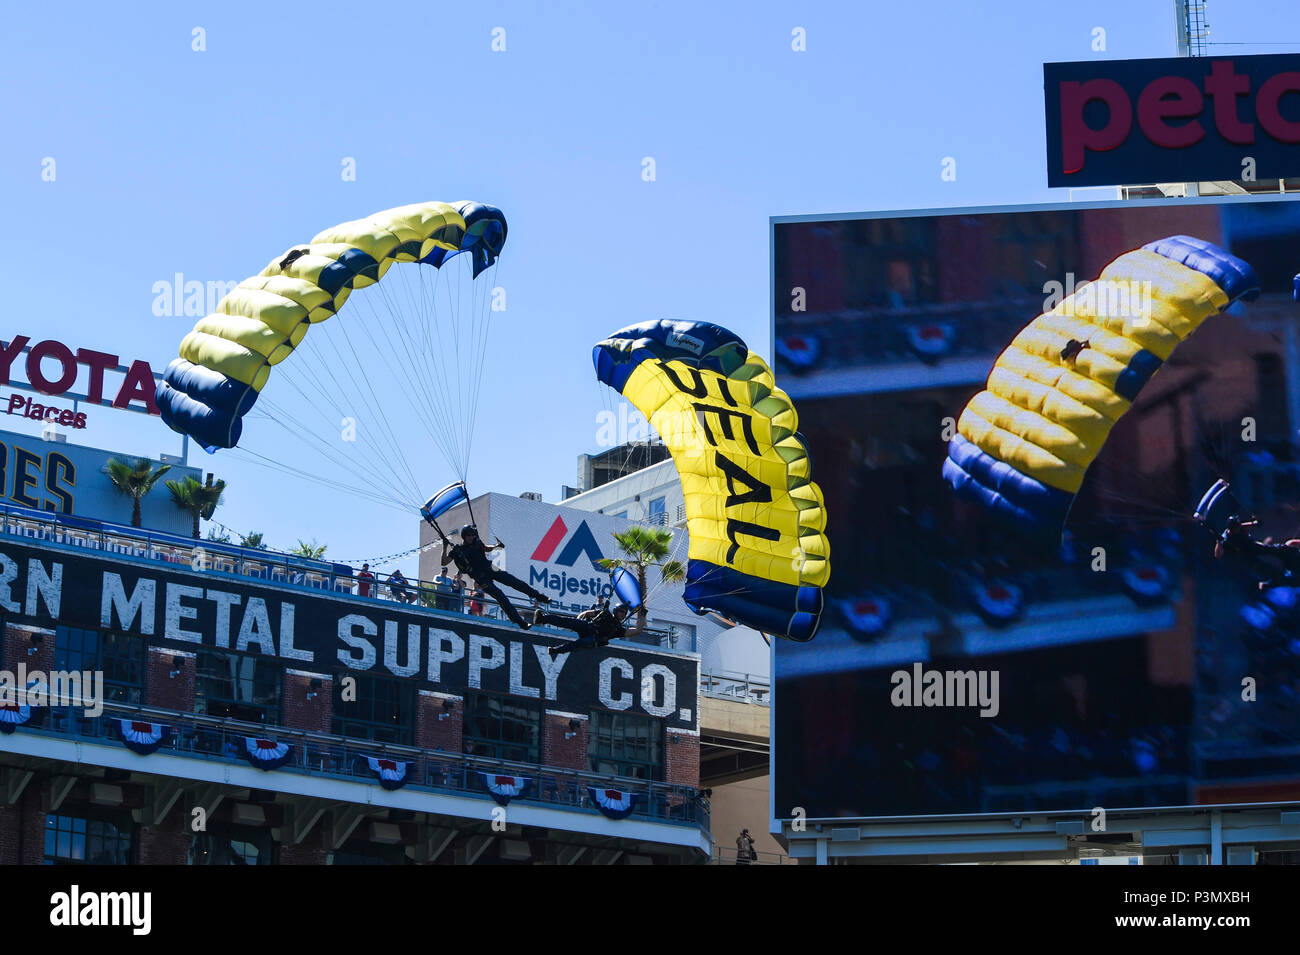 160710-N-VY375-038 SAN DIEGO (July 10, 2016) – Members of the U.S. Navy Parachute Team, the Leap Frogs, release a down plane during a demonstration at the Major League Baseball All-Star Futures Game above Petco Park. The Navy Parachute Team is based in San Diego and performs aerial parachute demonstrations around the nation in support of Naval Special Warfare and Navy recruiting. (U.S. Navy photo by Special Operator 1st Class Remington Peters/Released) Stock Photo